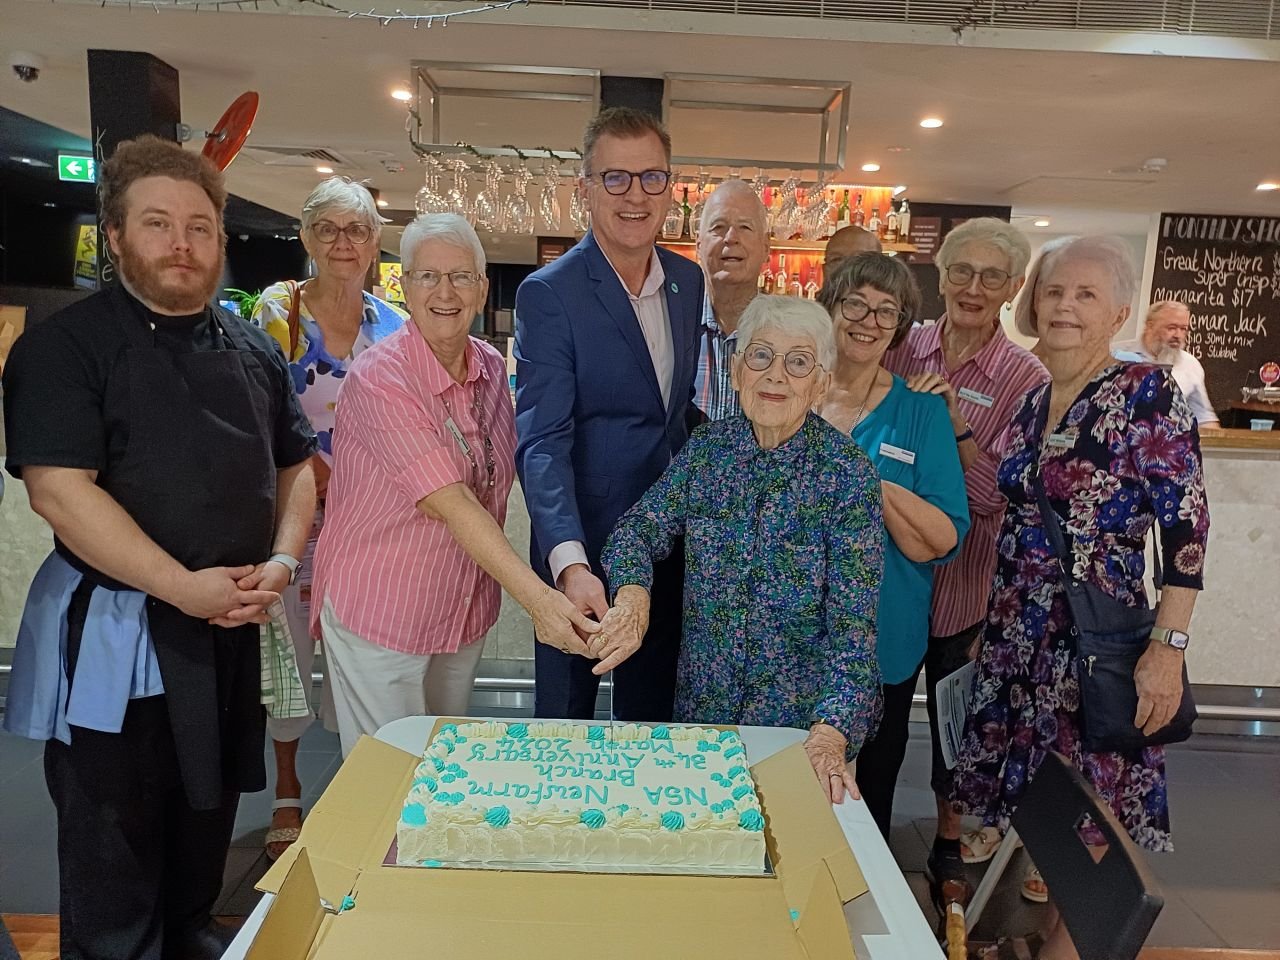 The Brunswick Hotel, New Farm.
NSA CEO Chris Grice, cutting the cake, ably assisted by senior branch members right up to the age of 92. Congratulations all round!